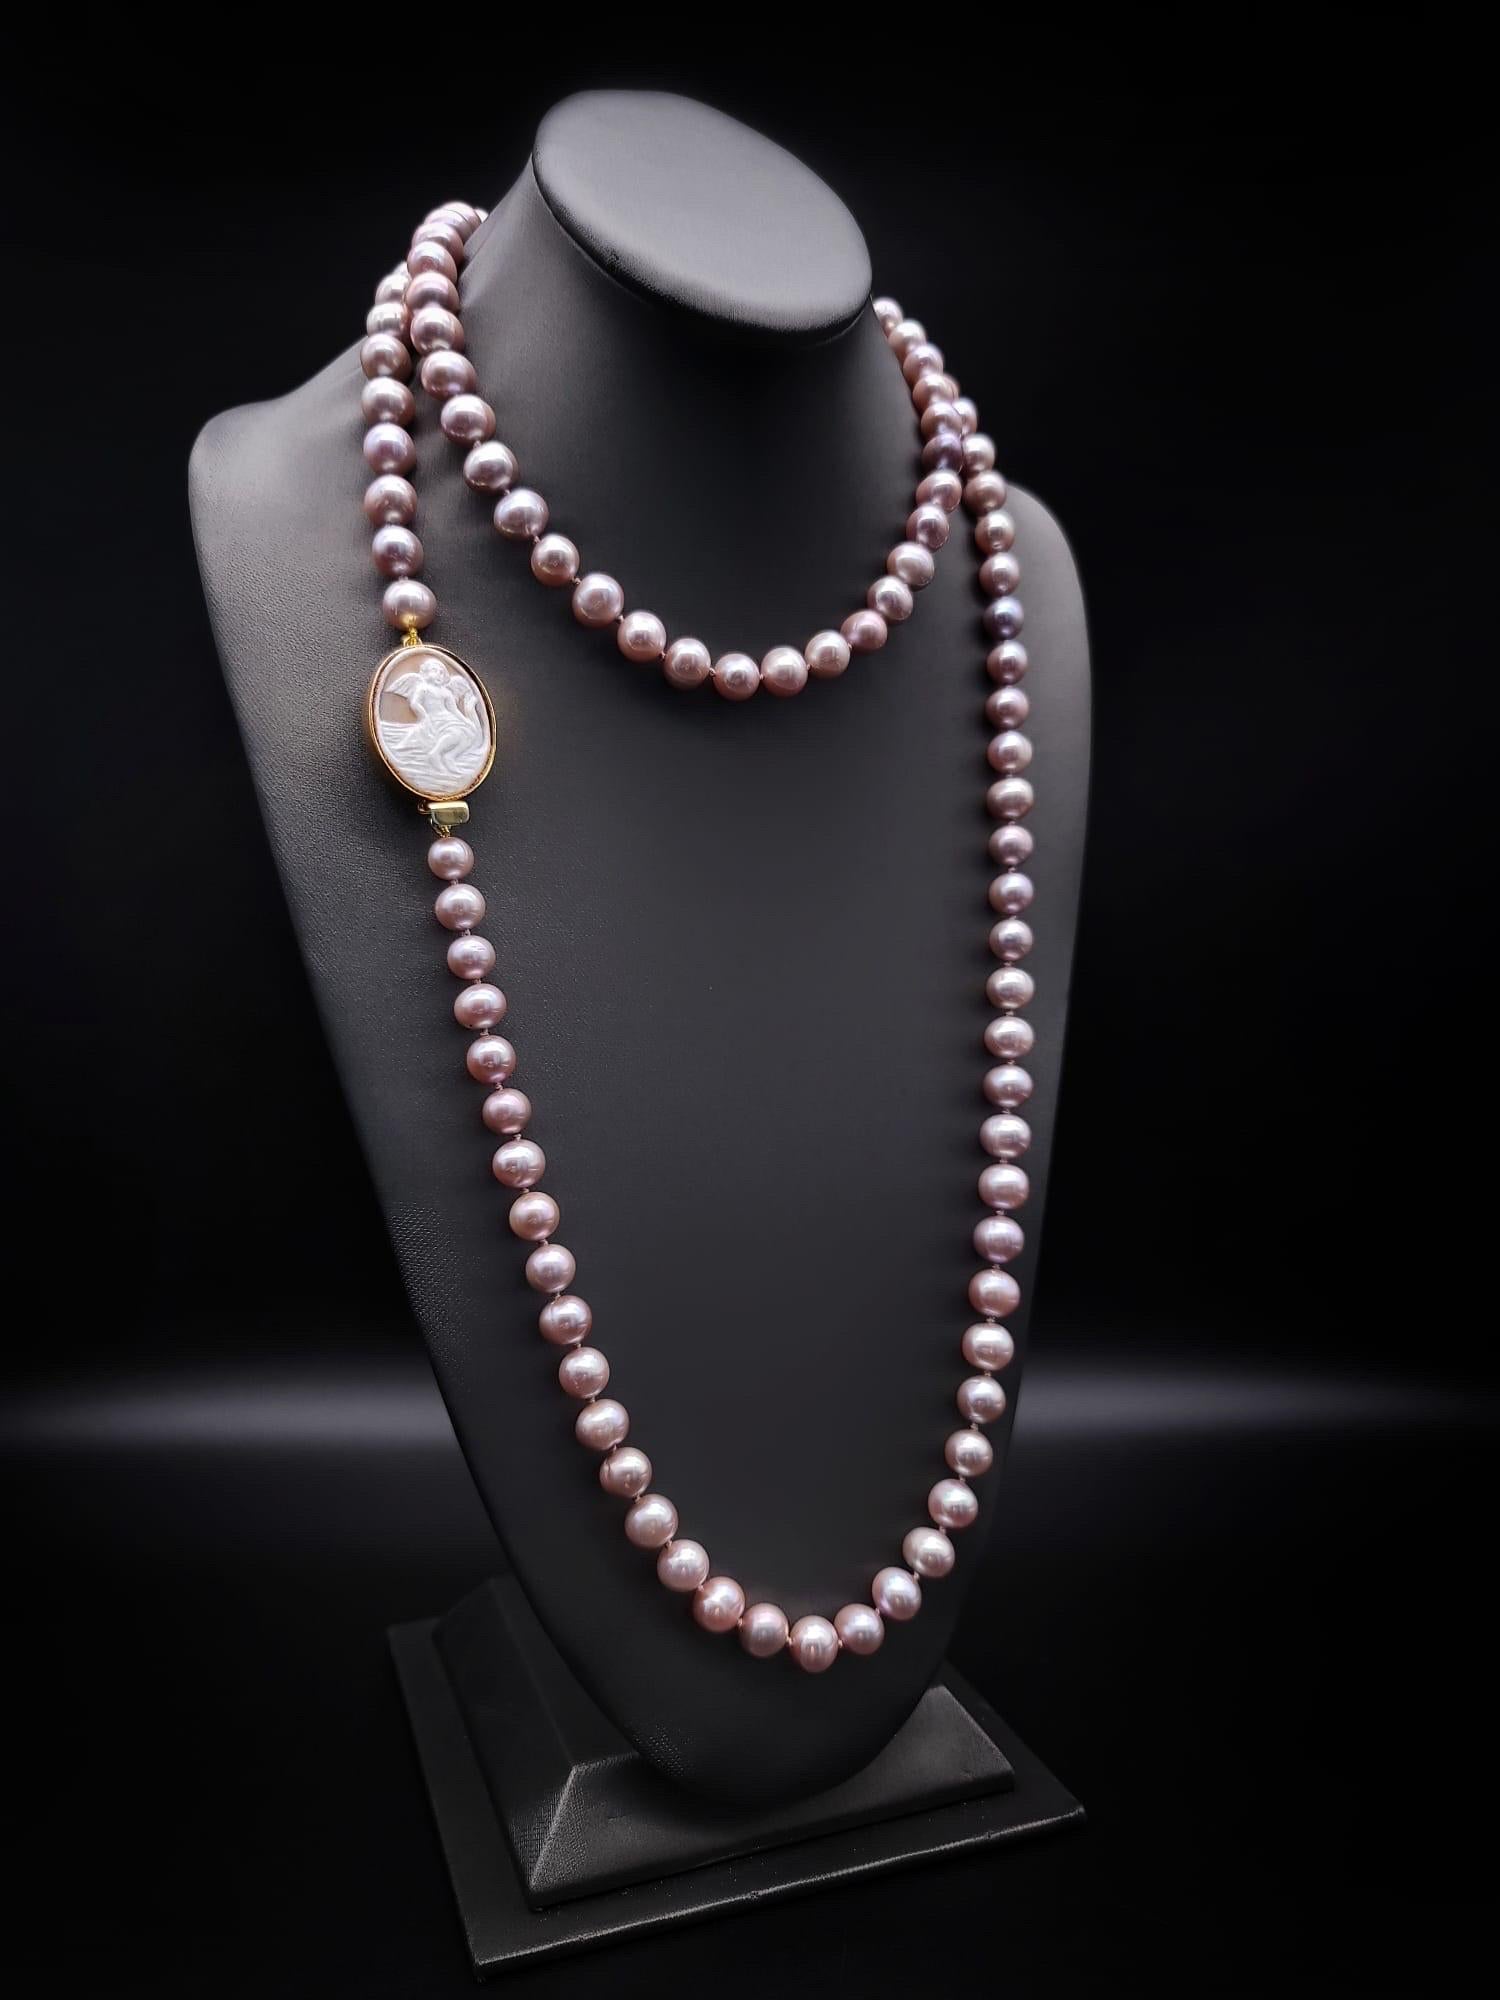 One-of-a-Kind

Spectacular Angel Skin Pink Freshwater Pearl necklace breathes timeless indulgence into an opulently distinctive design inspired by the past. Extremely versatile around 50 inches in rope length, anchored with a  vintage Italian cameo